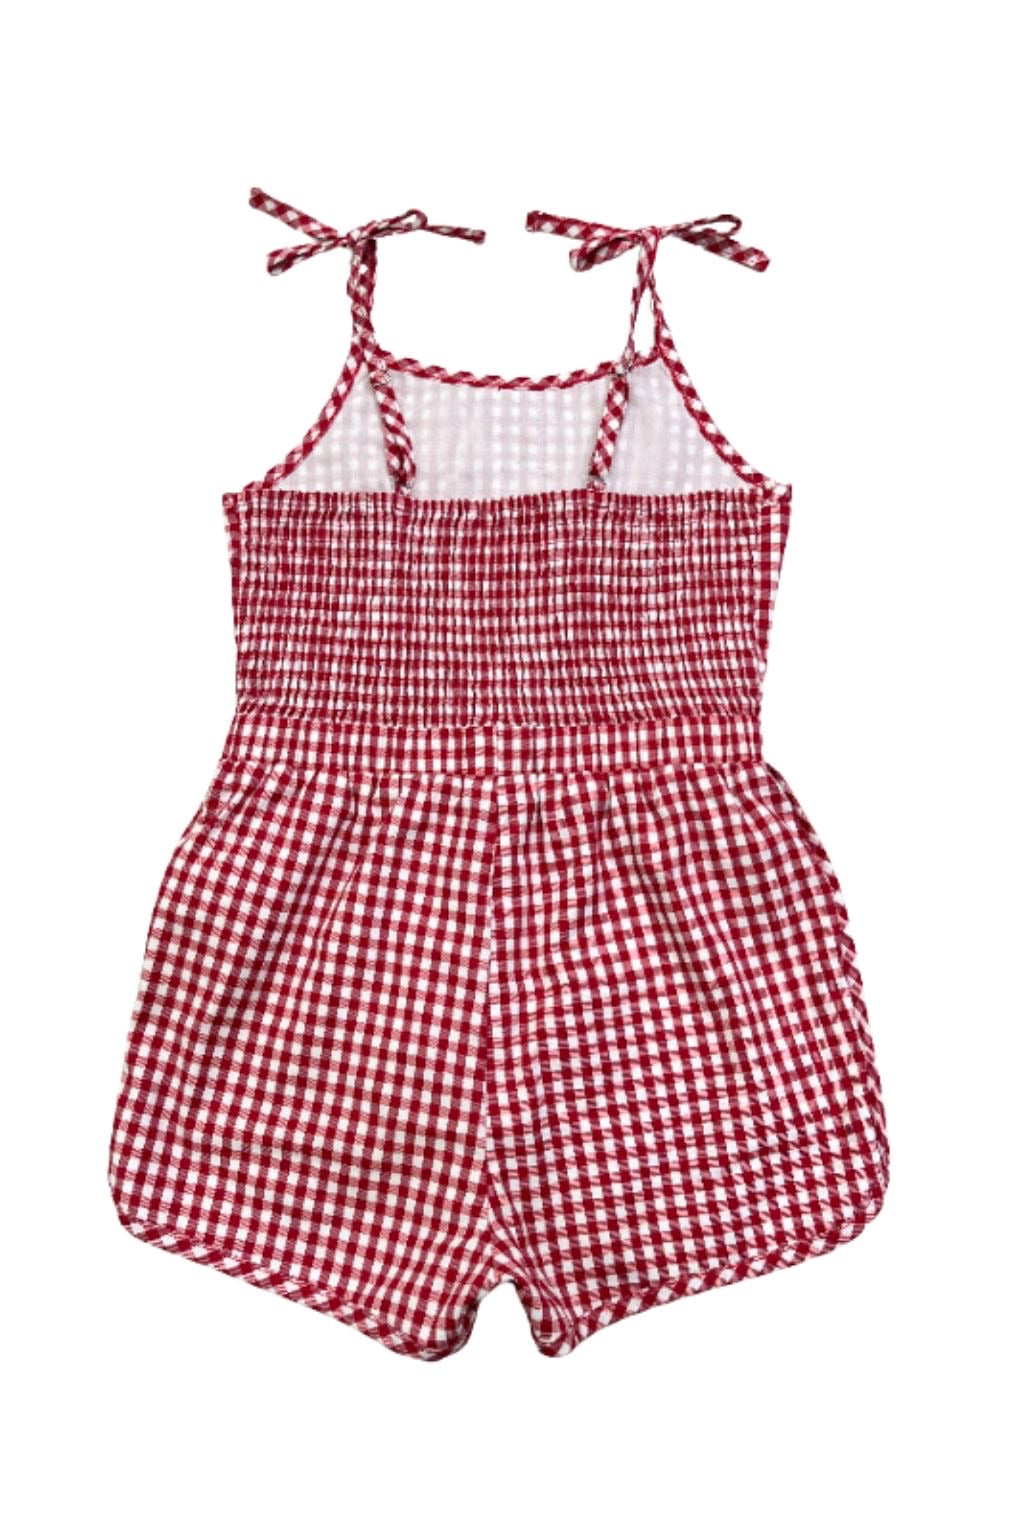 *PREORDER* Red Gingham Short Style Romper